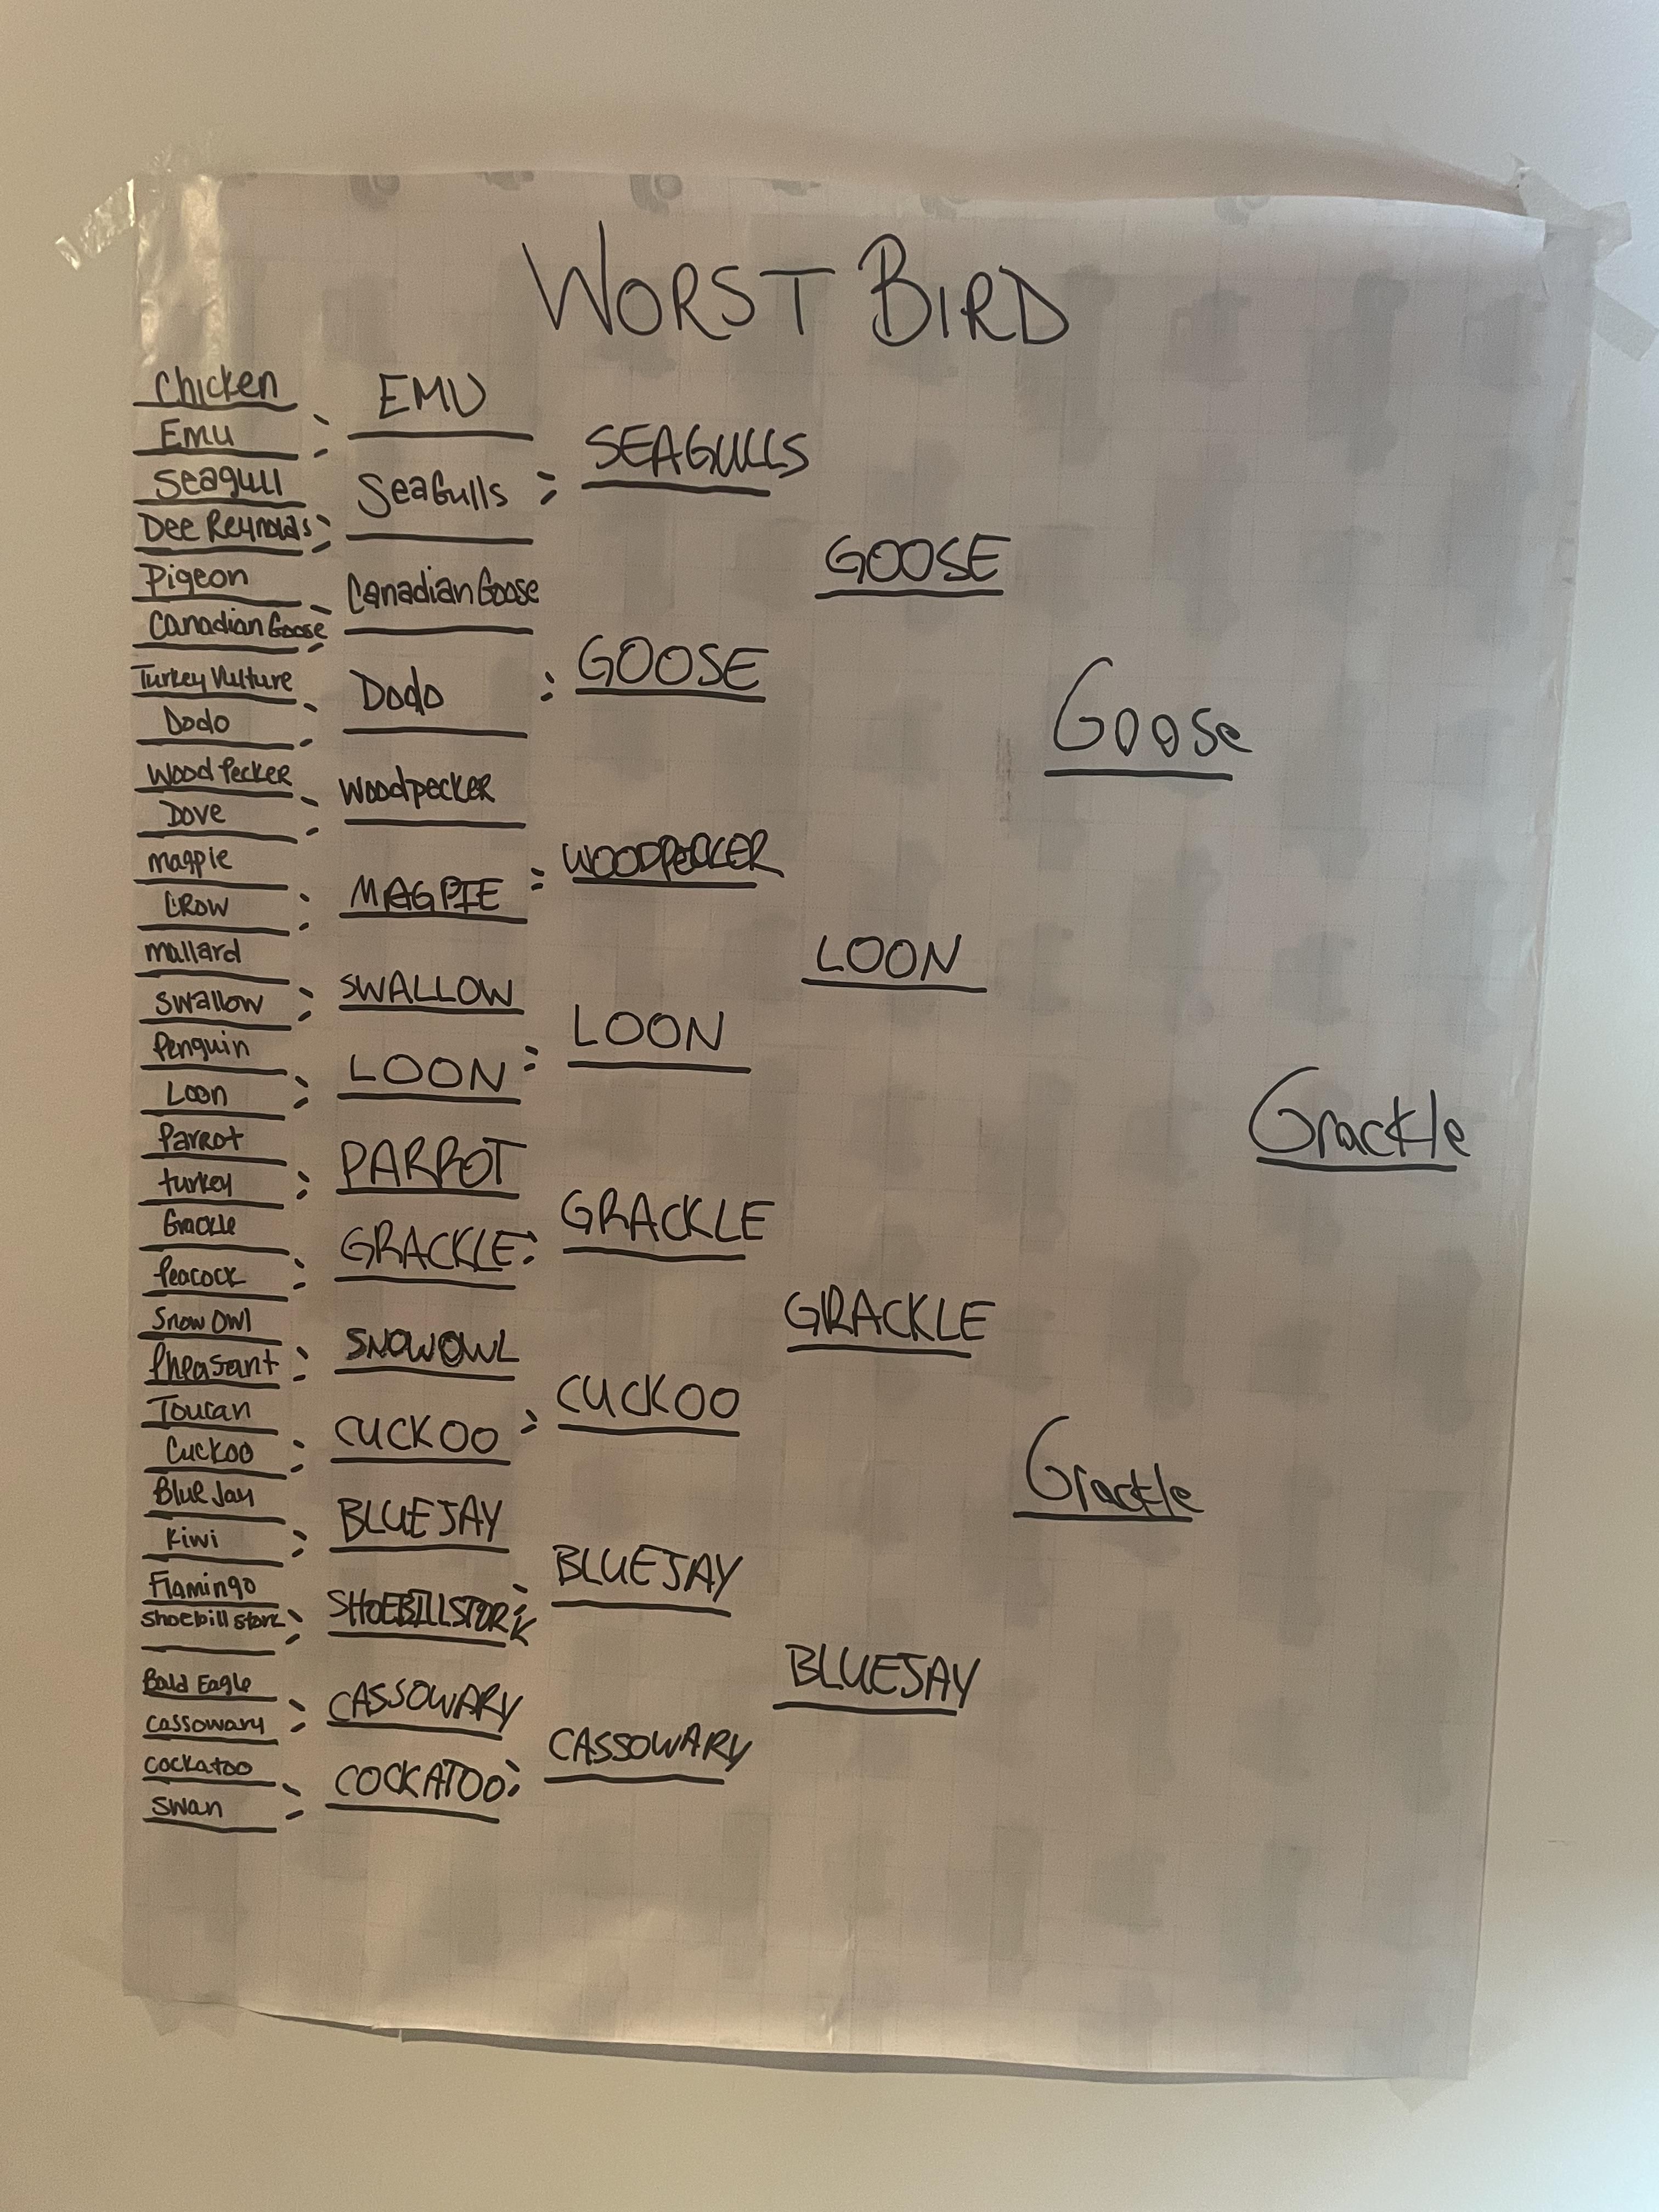 My family does brackets for holidays, this was our Christmas bracket